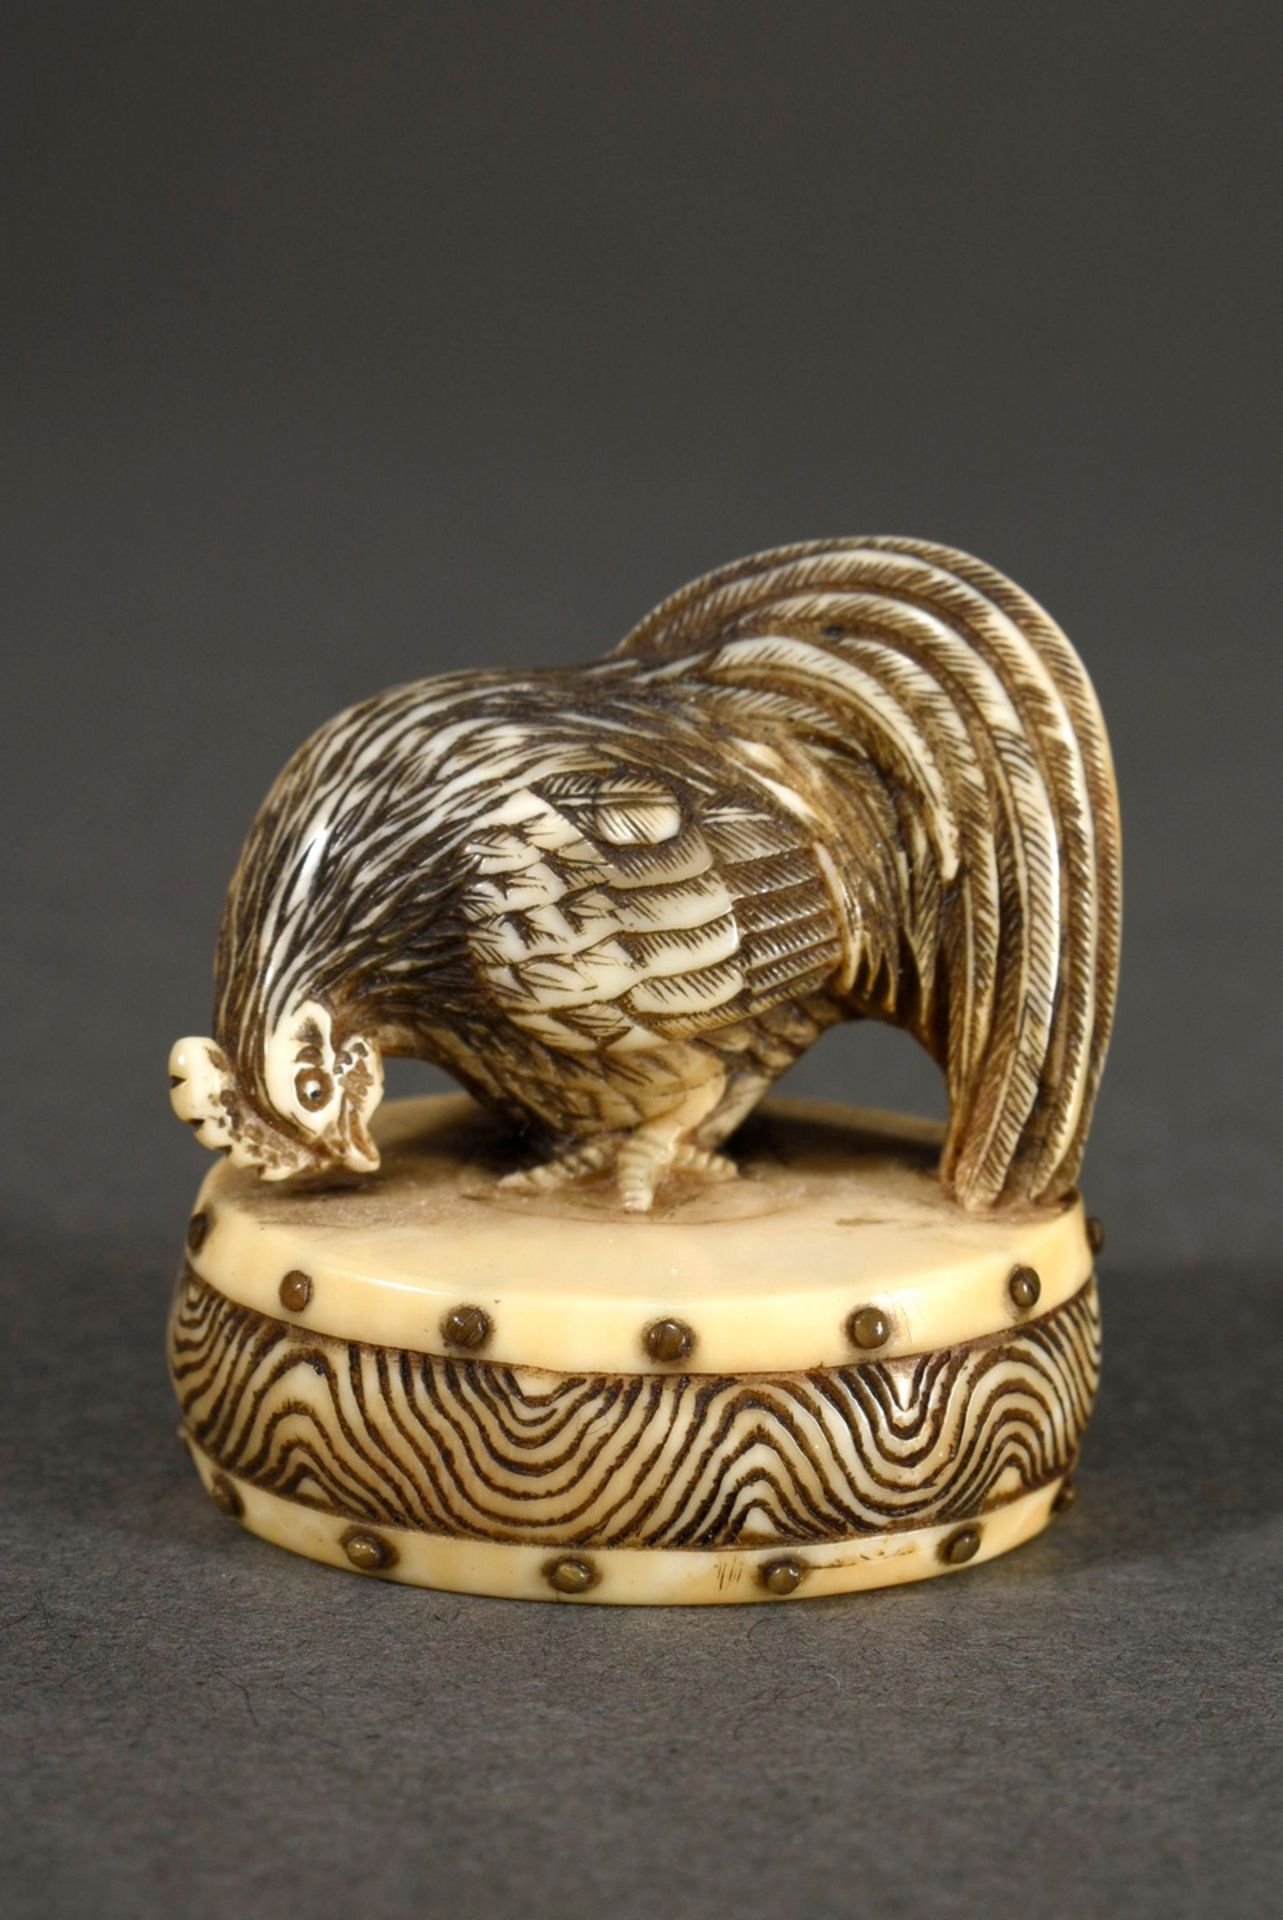 Ivory netsuke "cock on drum" with drum buttons of black horn, beautiful patina of use, around 1850,